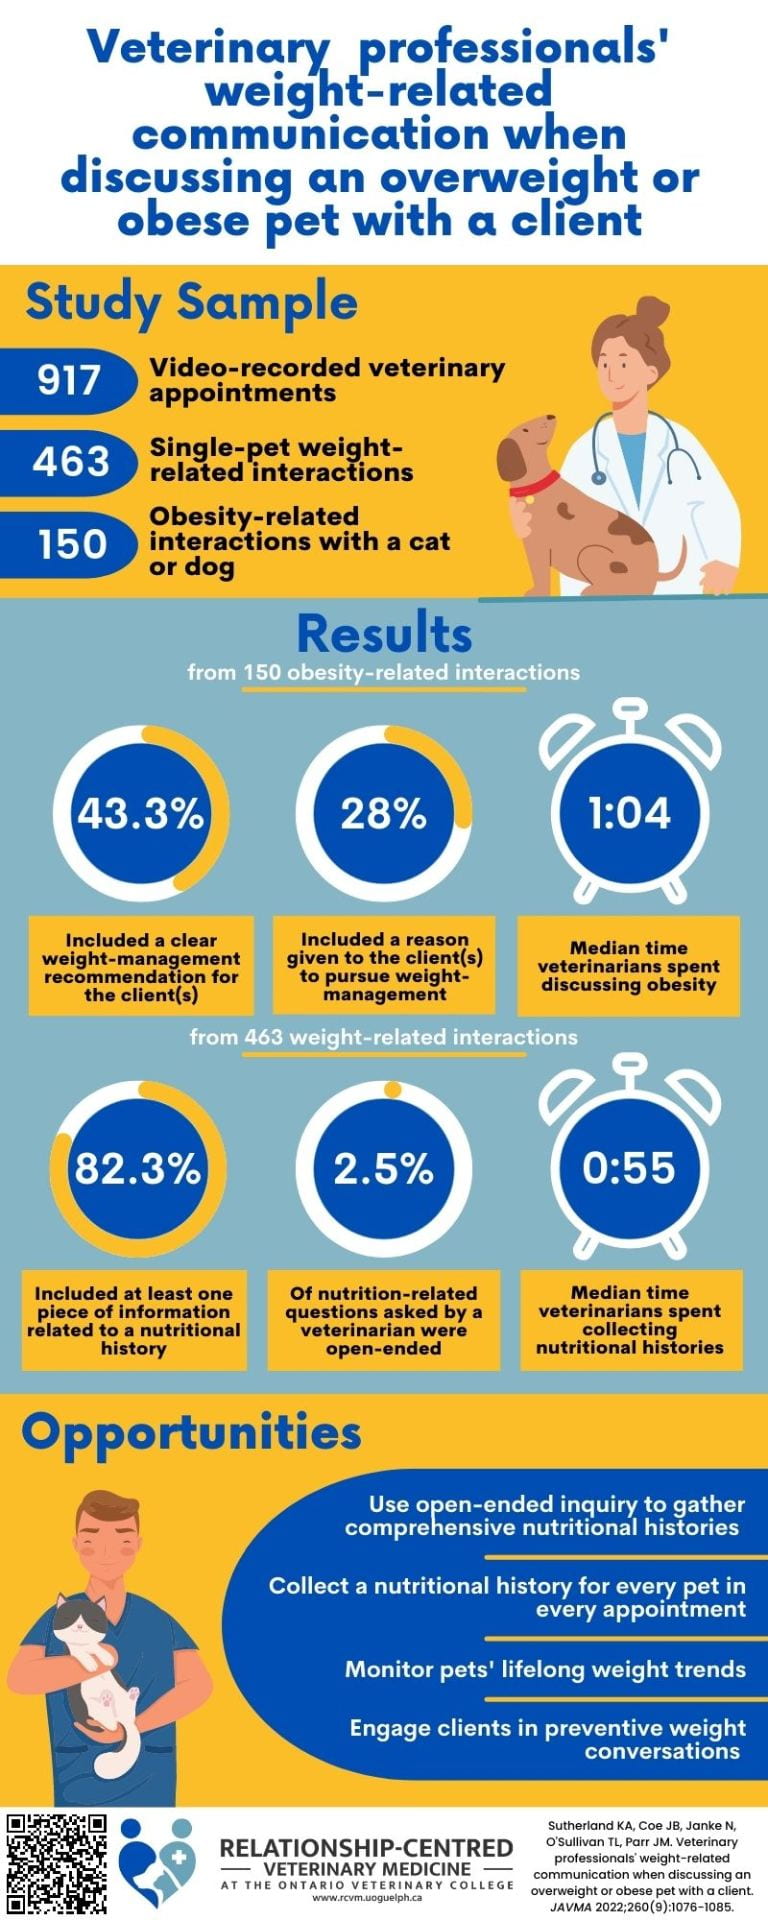 Infographic describing key methods and results of study. 